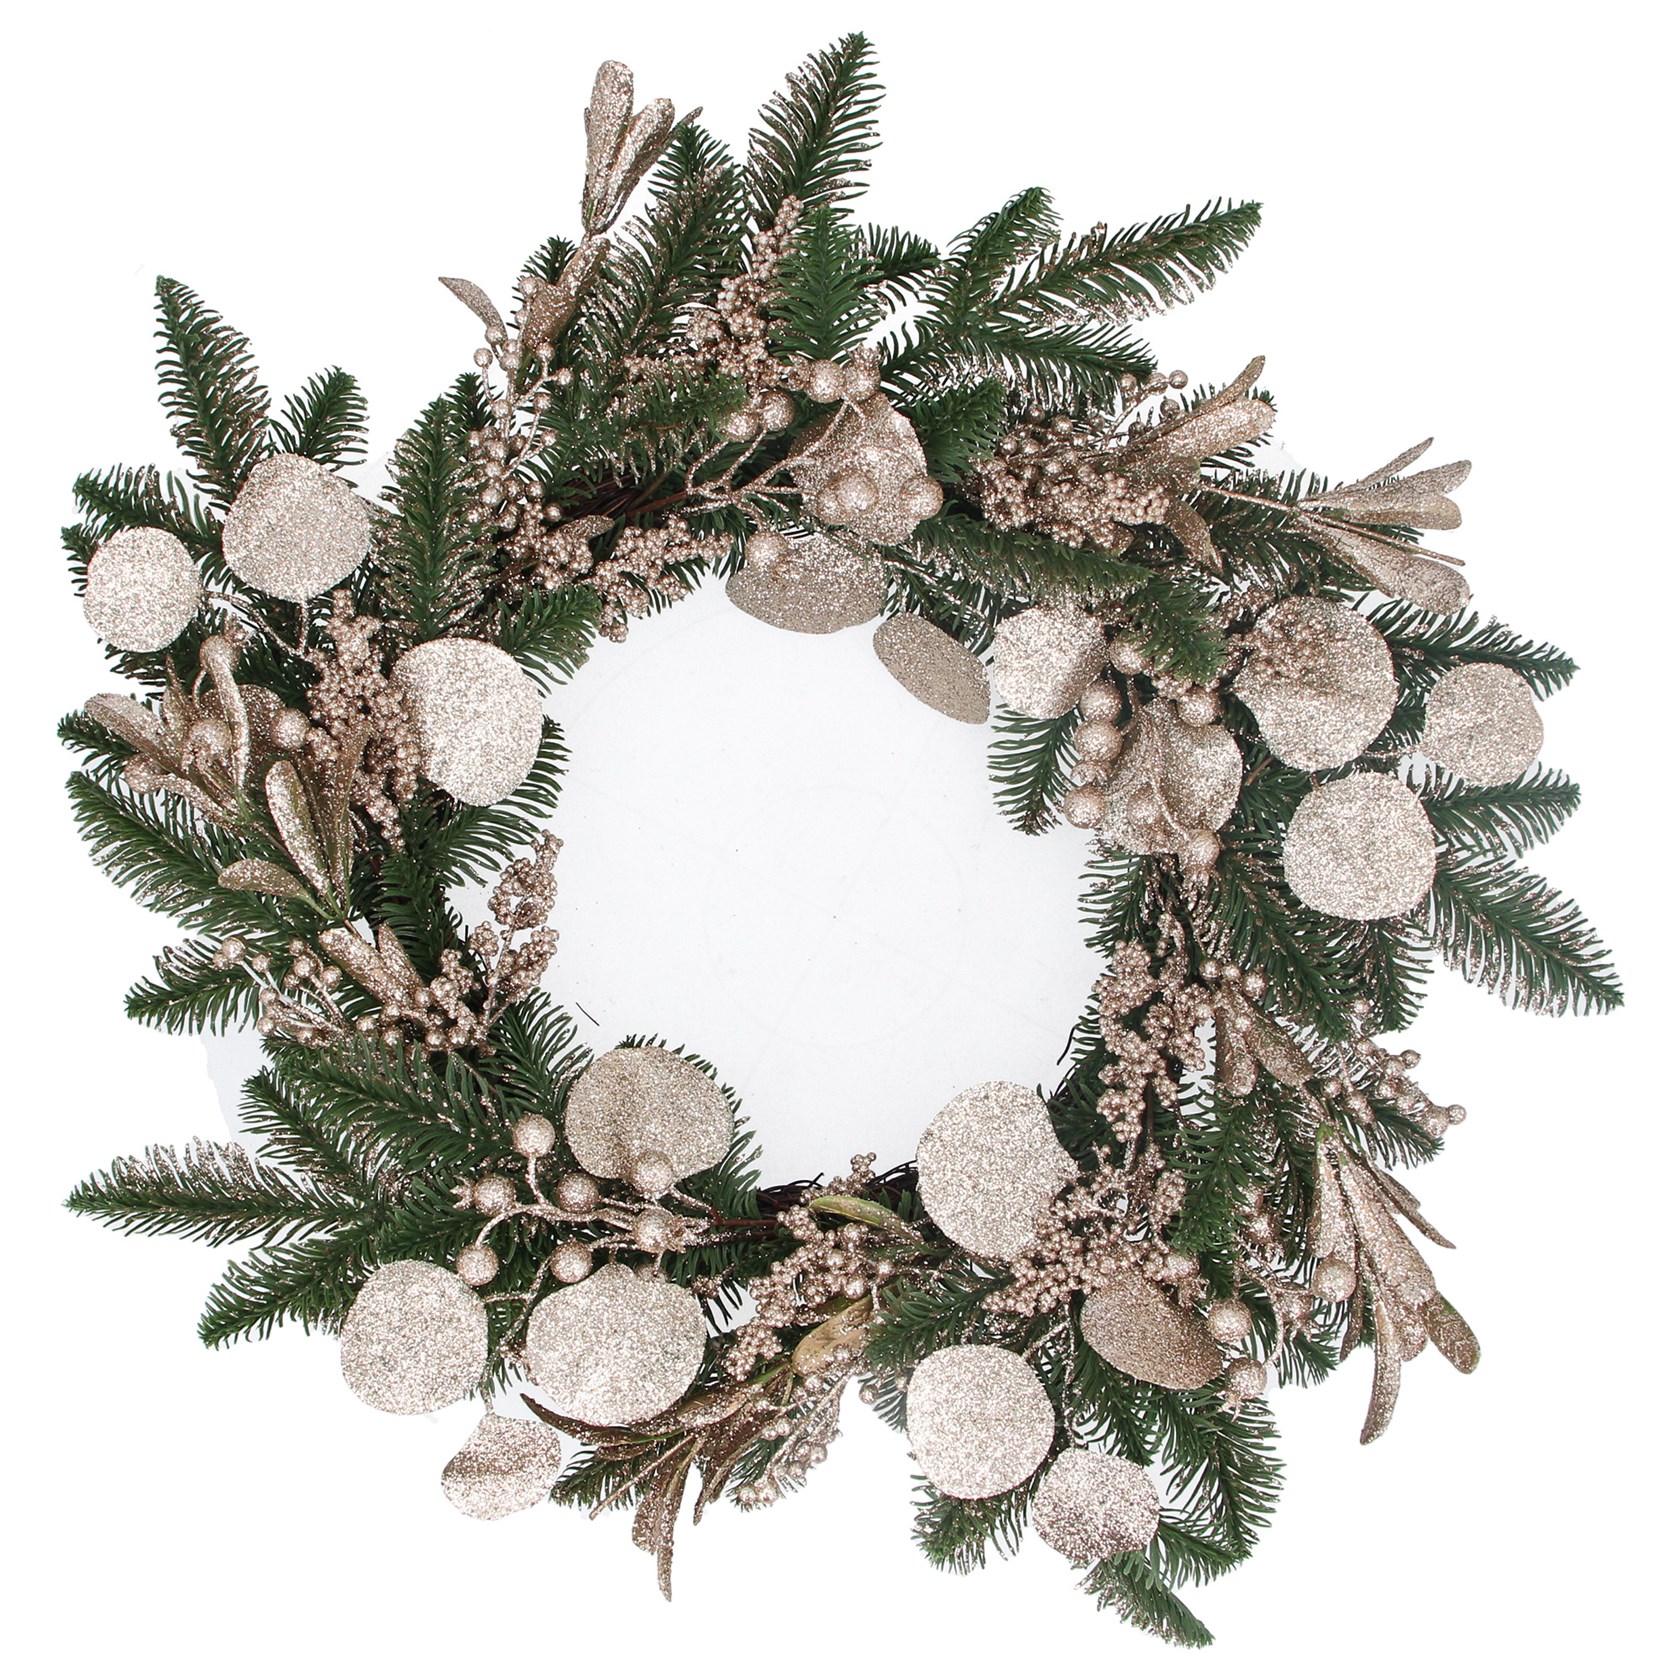 Gold pine and eucalyptus mini berries Christmas wreath. By Gisela Graham. The perfect festive addition to your home.